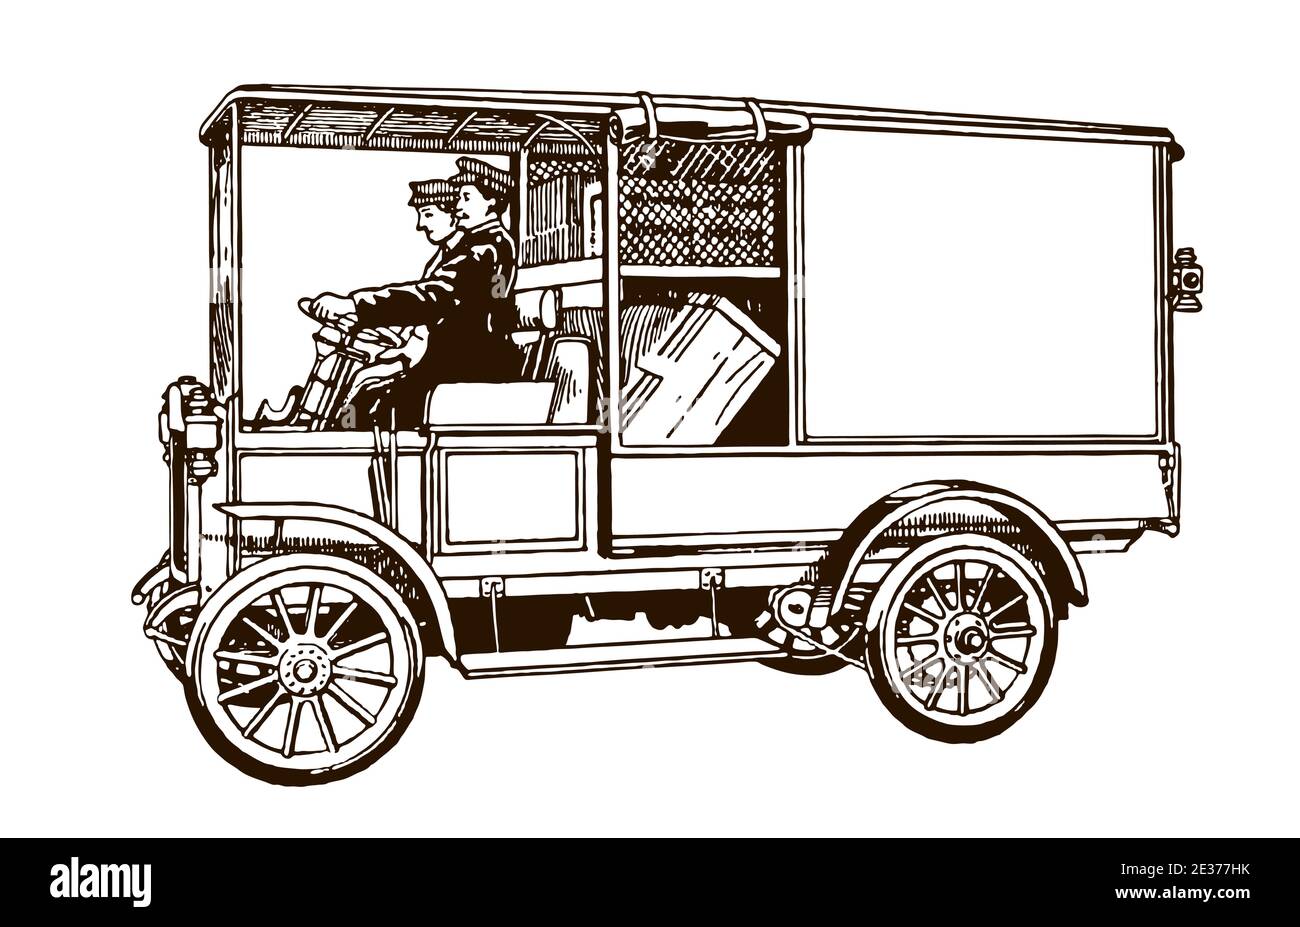 Two couriers from the early 20th century driving an antique delivery van, in side view Stock Vector